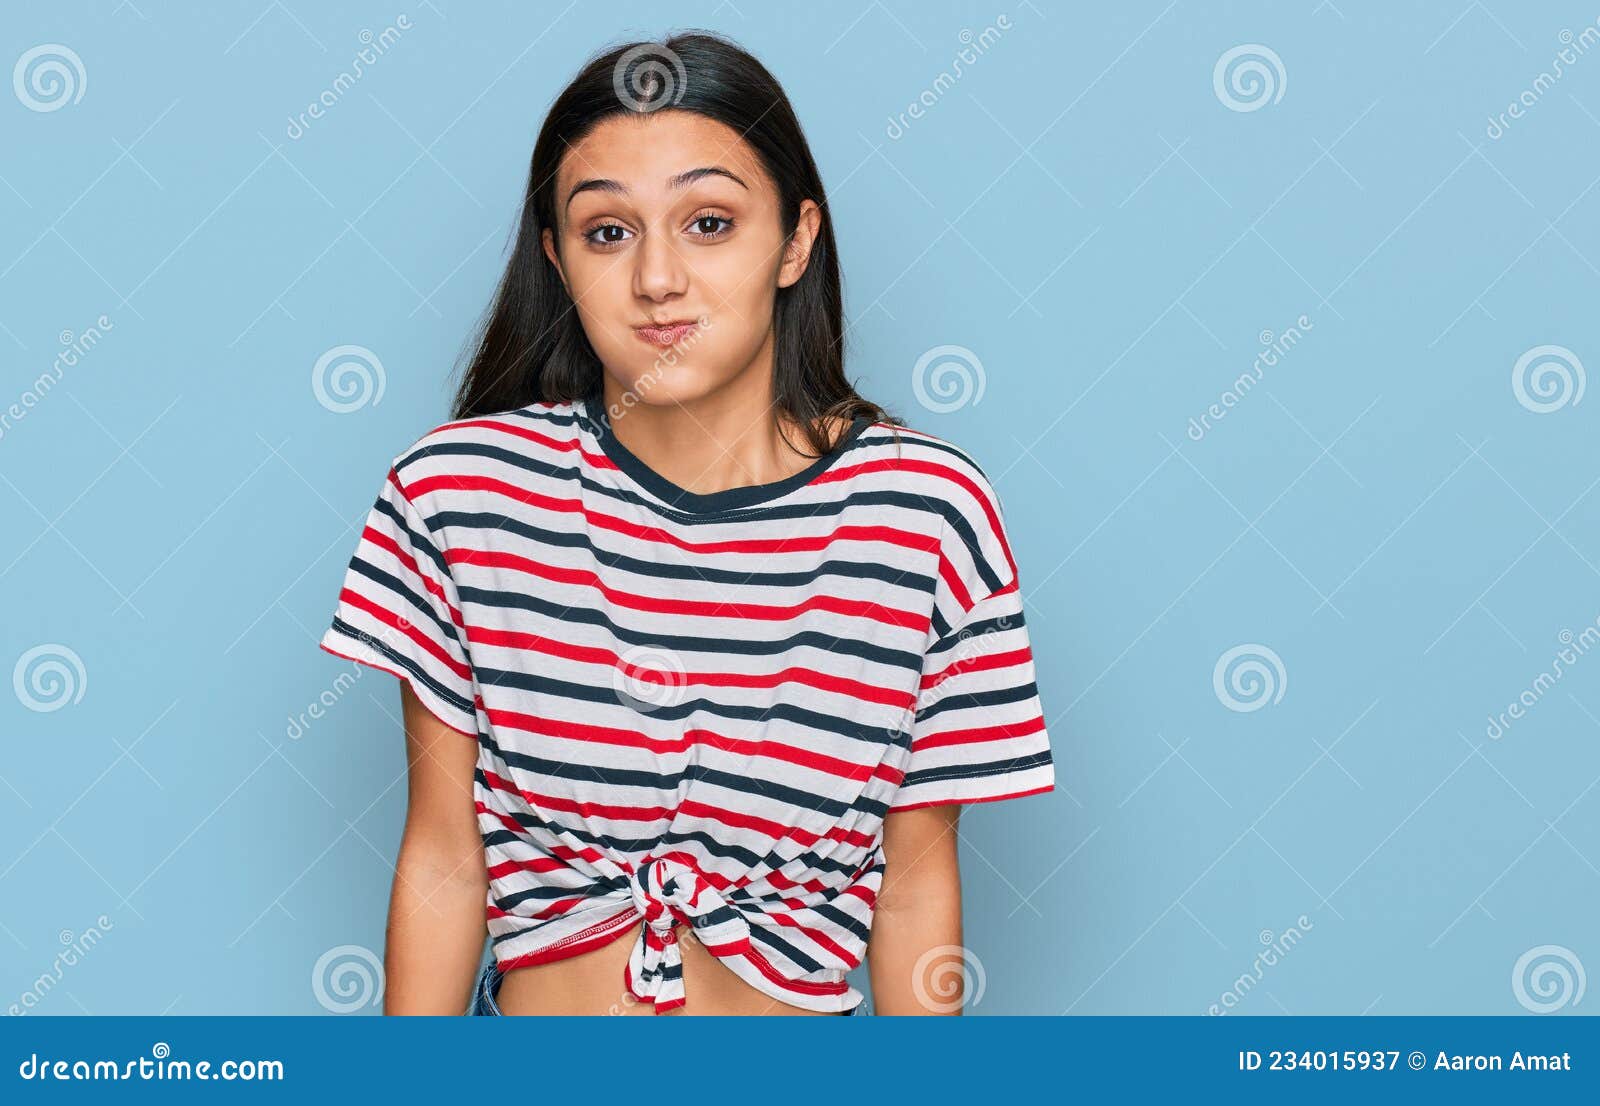 Young Hispanic Girl Wearing Casual Clothes Puffing Cheeks With Funny